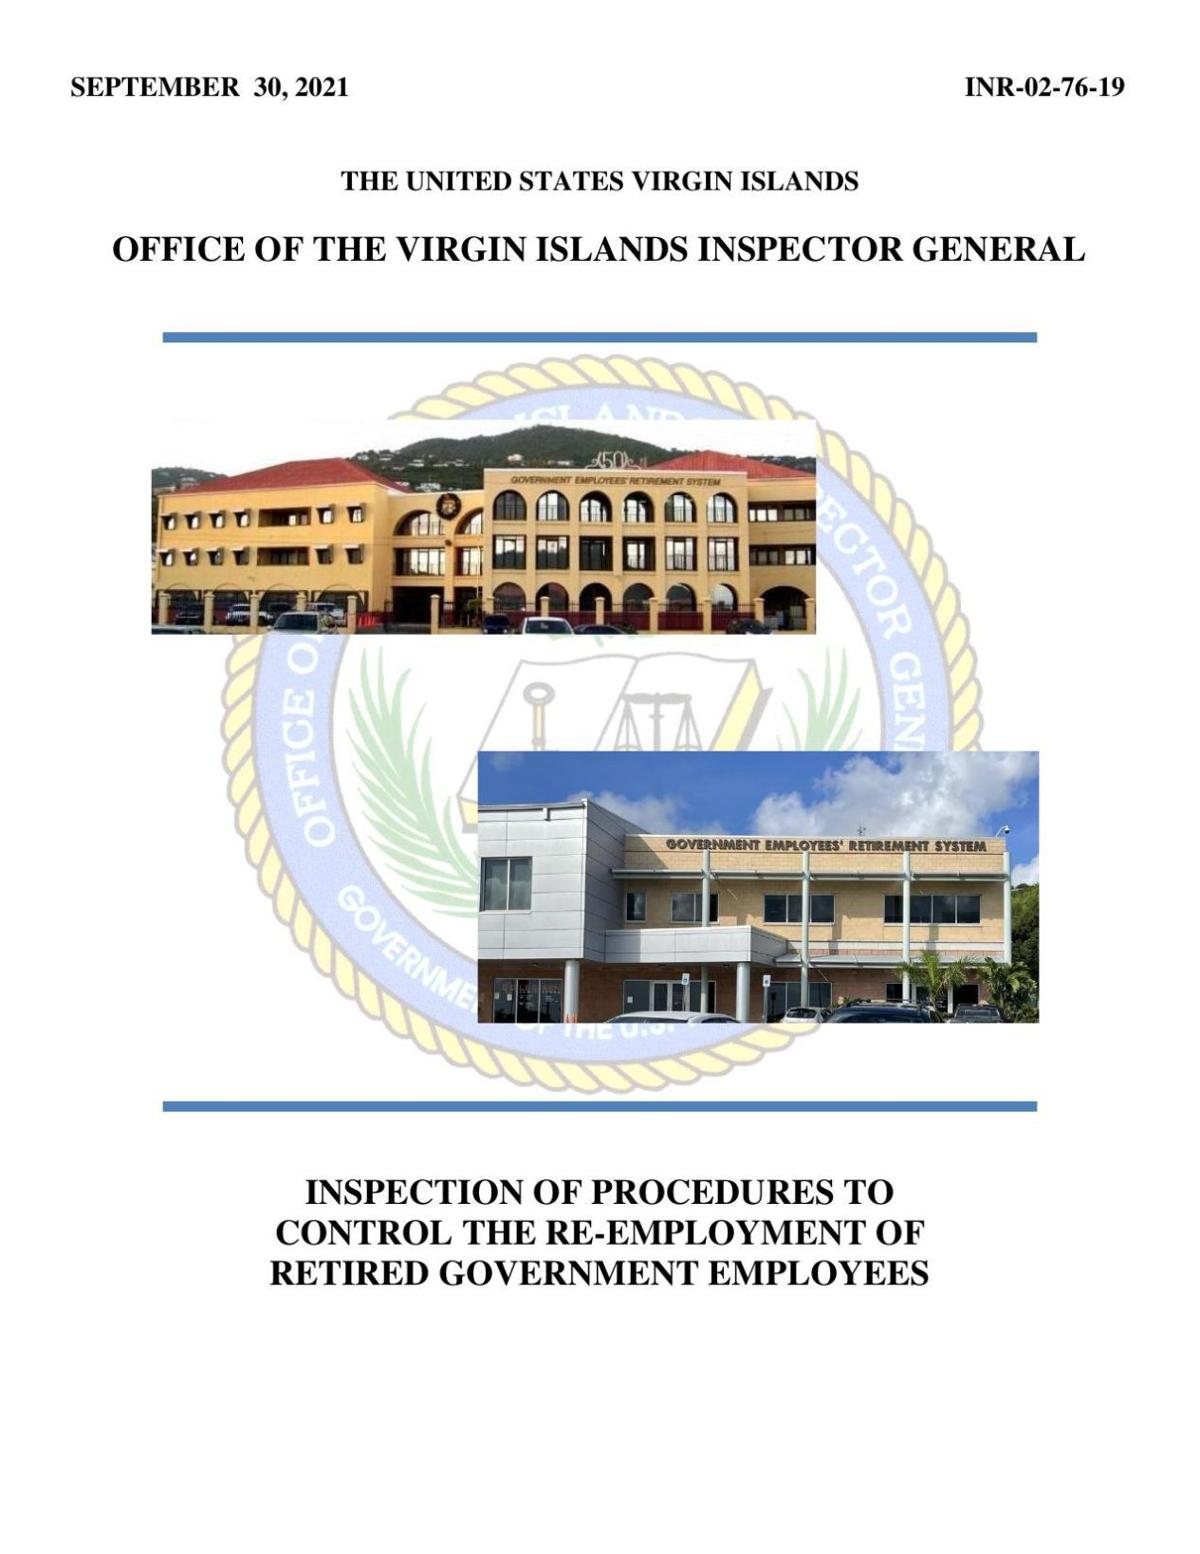 Audit on the re-employment of retired government employees